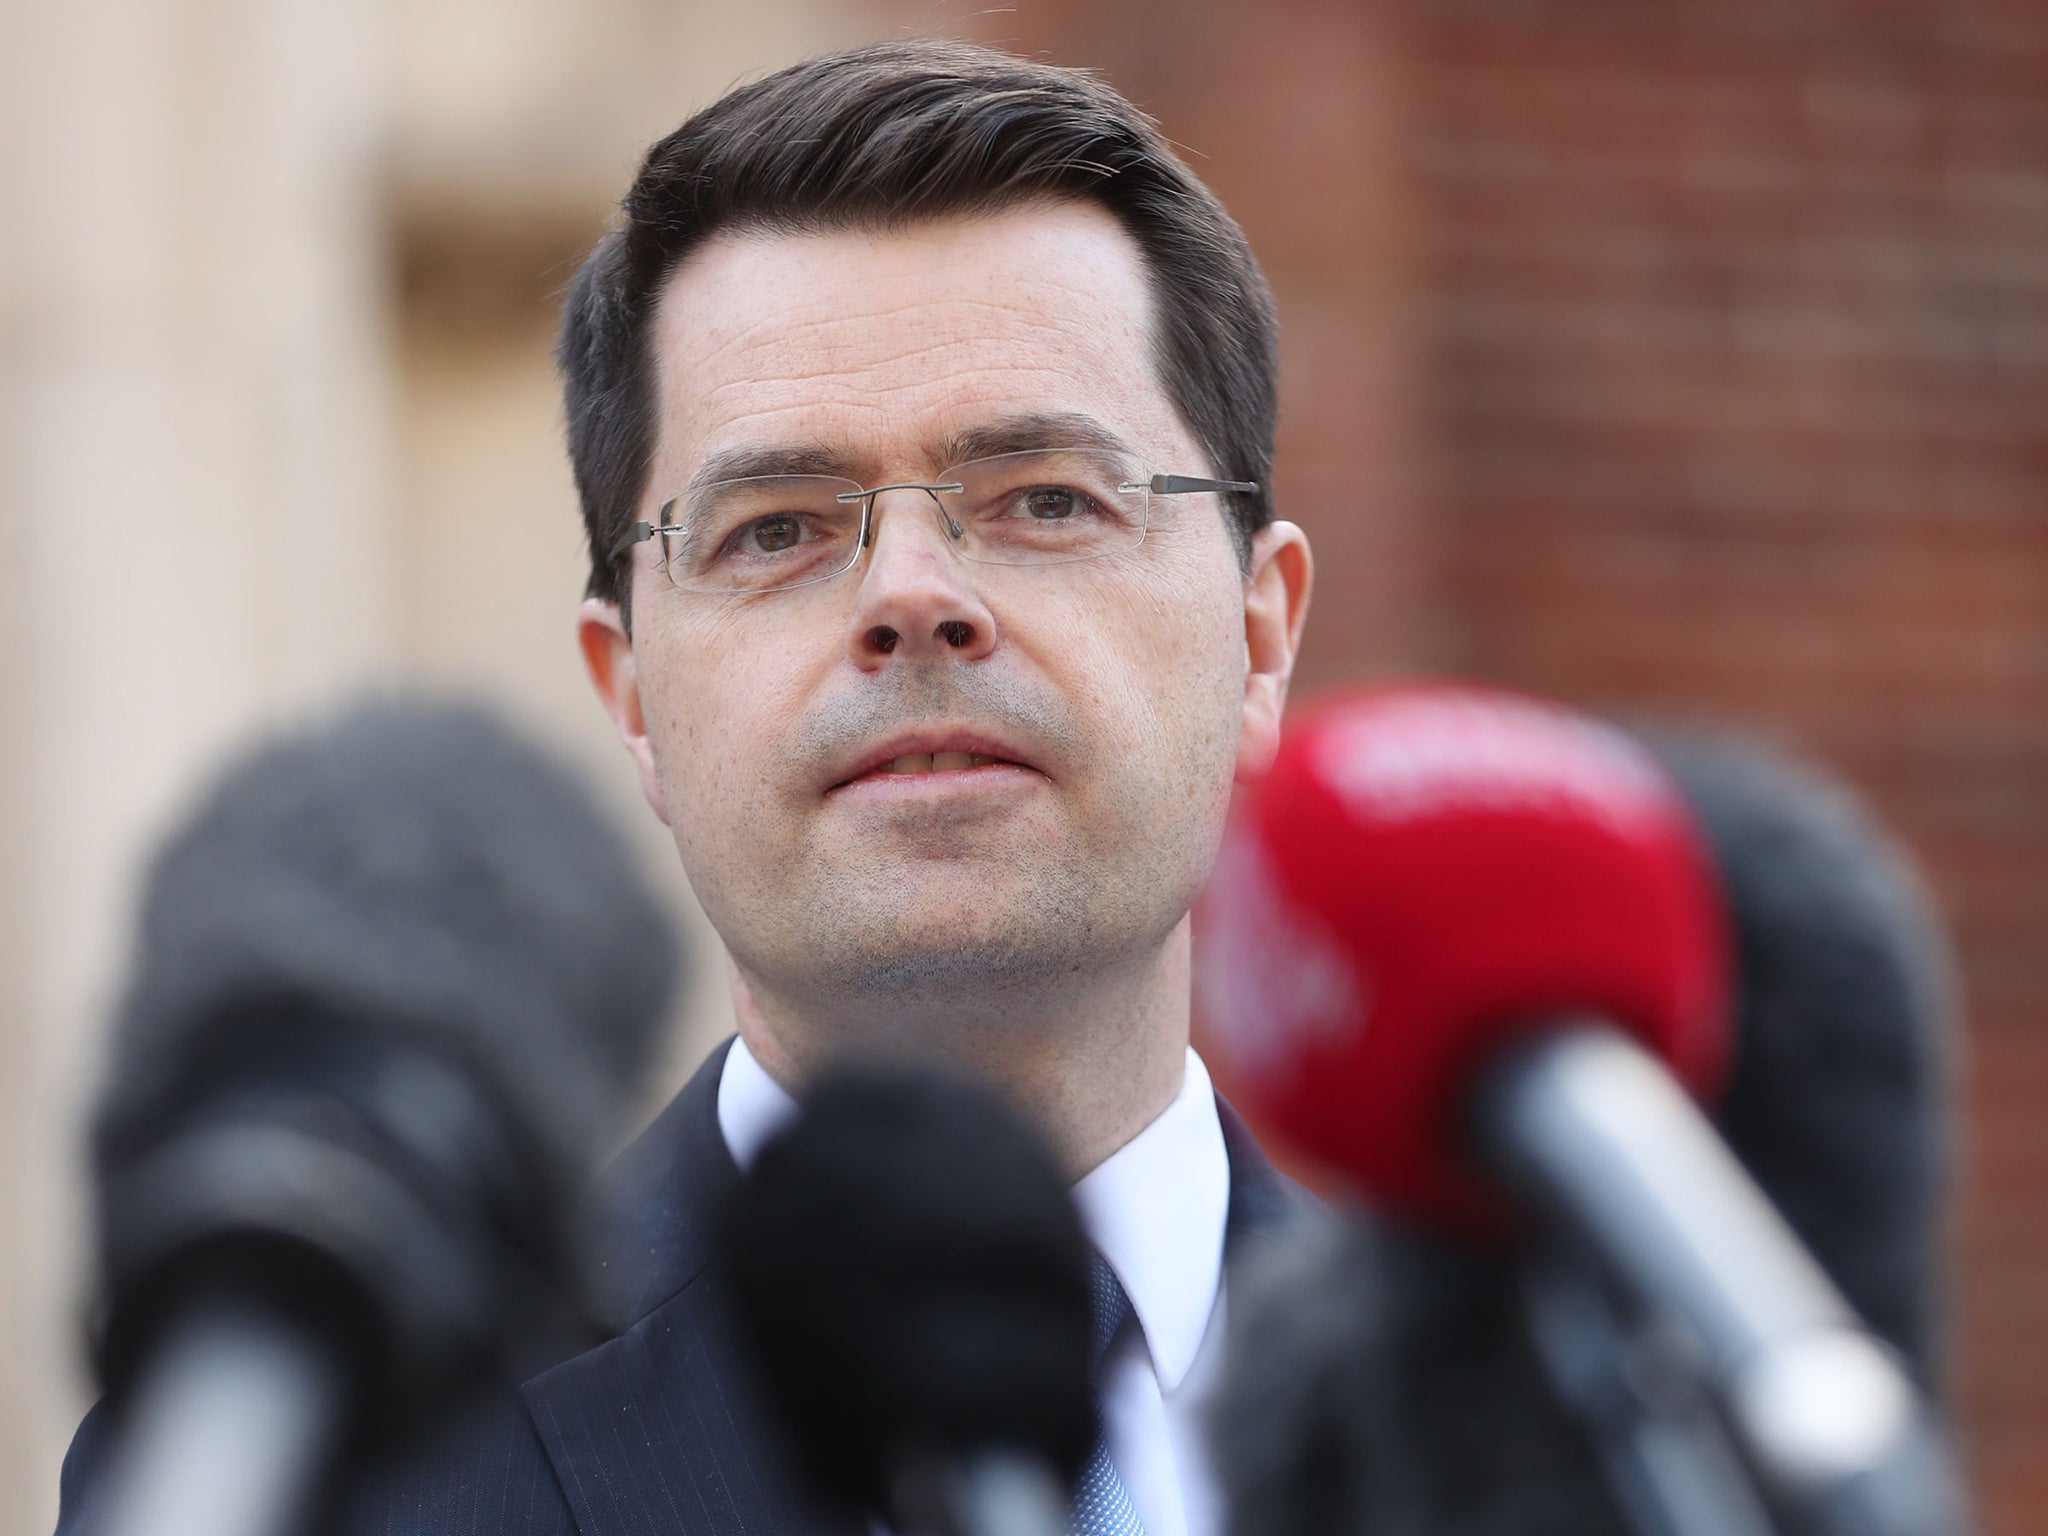 James Brokenshire makes a statement outside his office at Stormont House